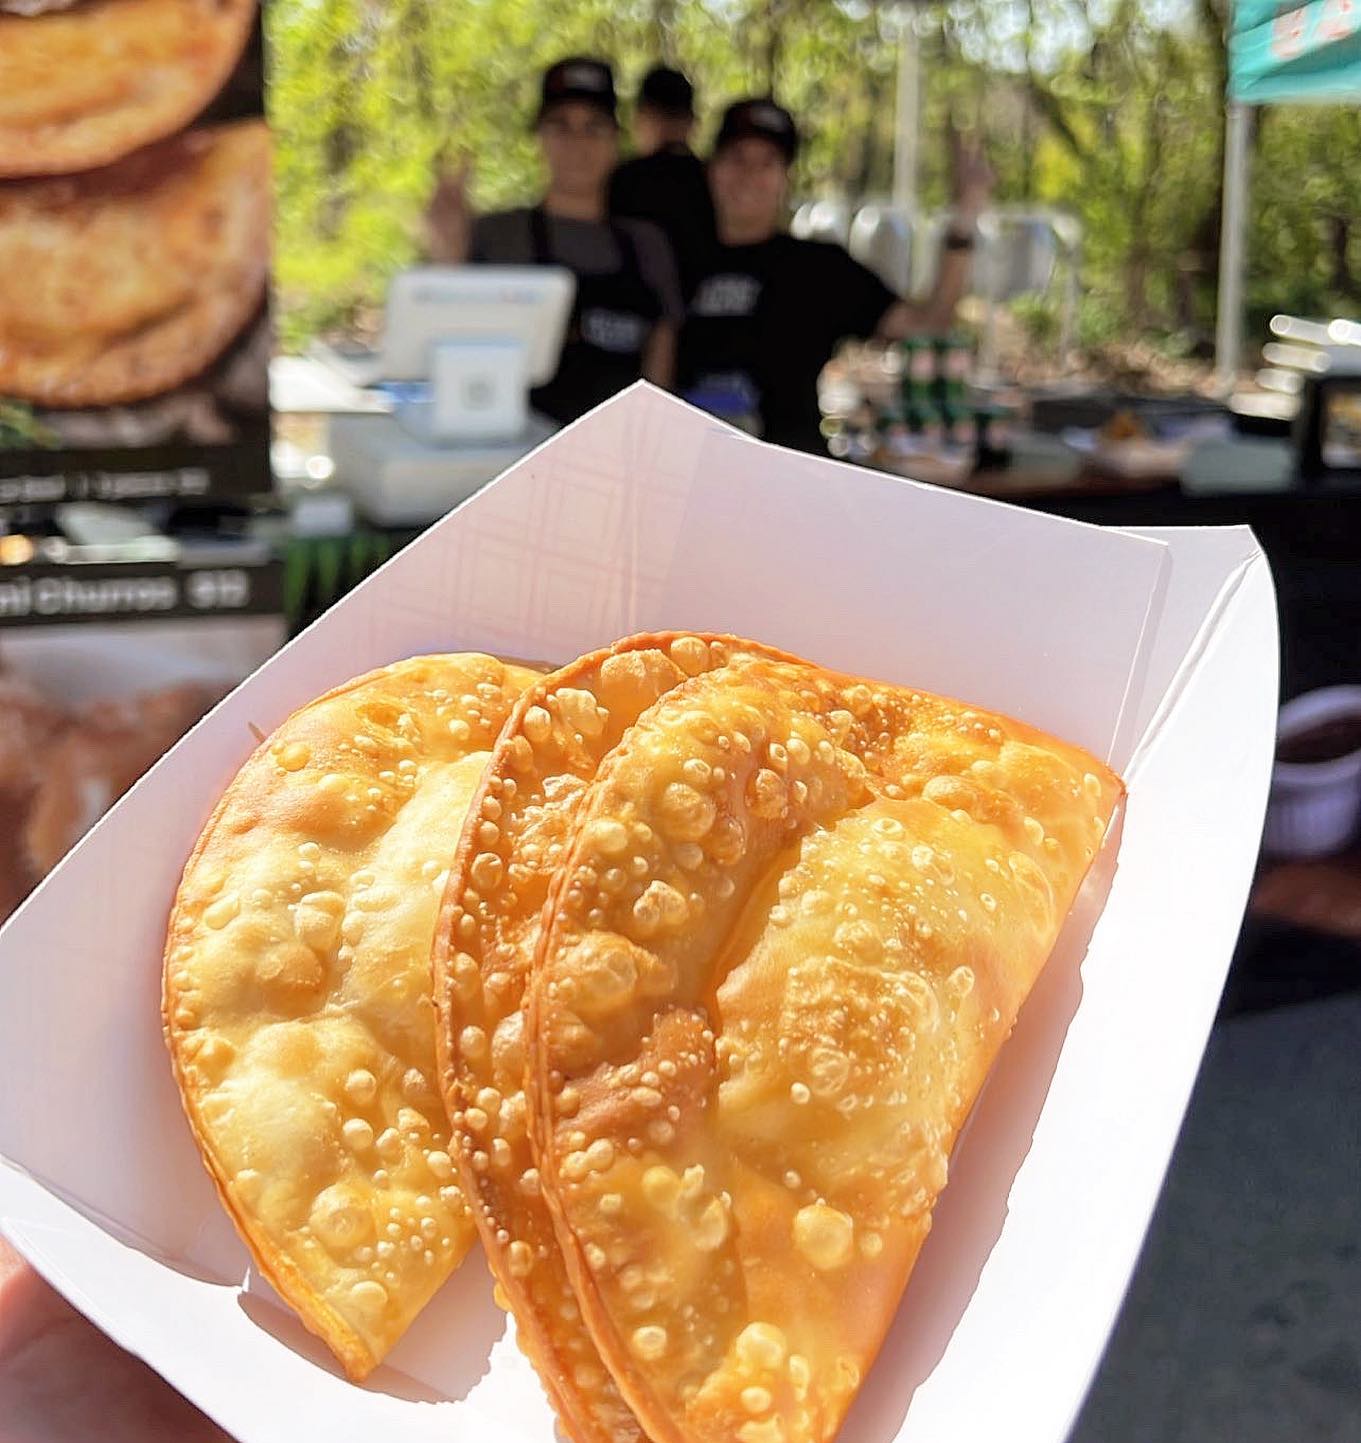 Authentic “pastel de feira” (Brazilian empanadas) today at @smorgasburg @prospect_park from 11:00AM - 06:00PM. 
.
Delivery available to Manhattan, Queens and Brooklyn. Online orders only at www.petiscobrazuca.com 🇧🇷
.
.
.
#petiscobrazuca #coxinhas #pastel #newyork #prospectpark #nyc #brooklyn #queens #manhattan #brazilianfood #foodporn #brazilianempanadas